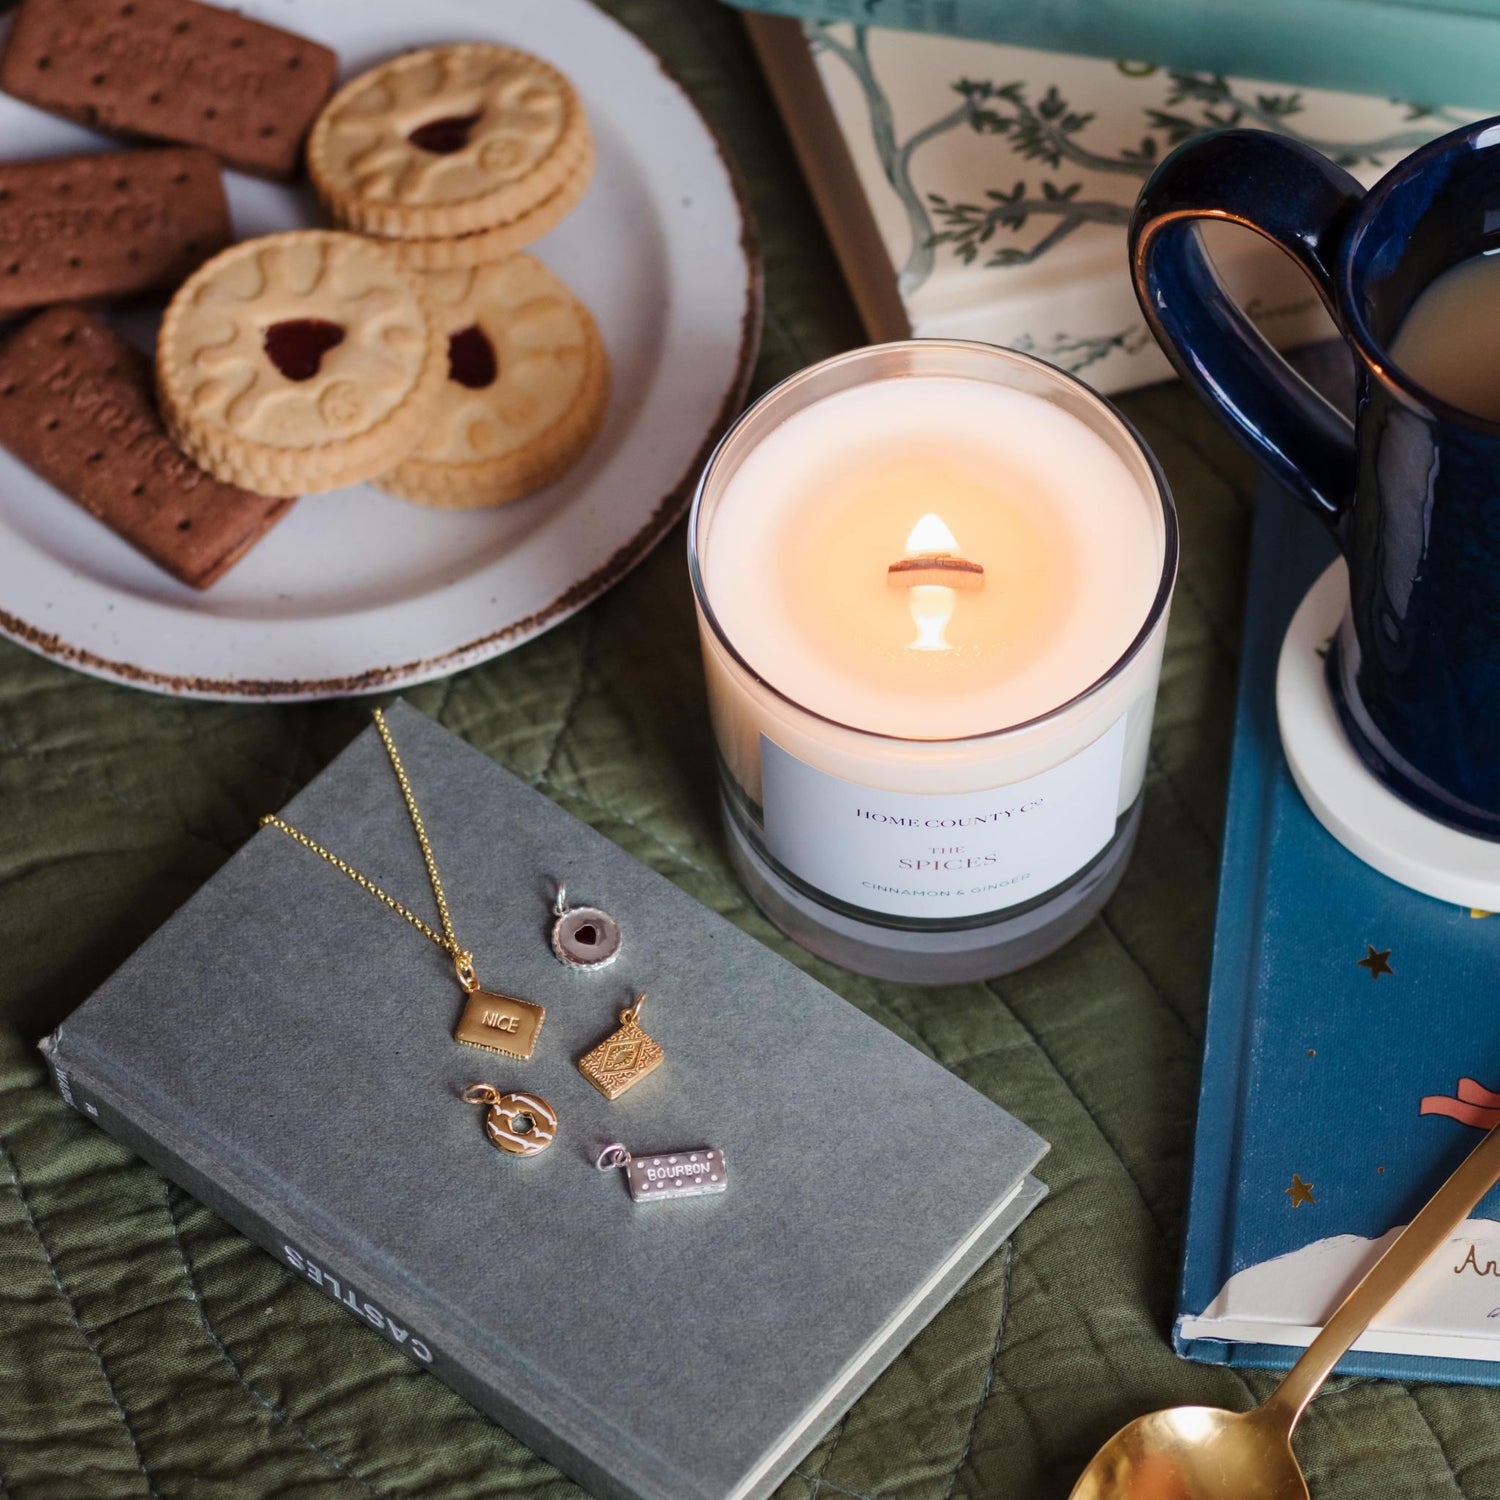 Home County Co. soy candle is shown with its wooden wick lit